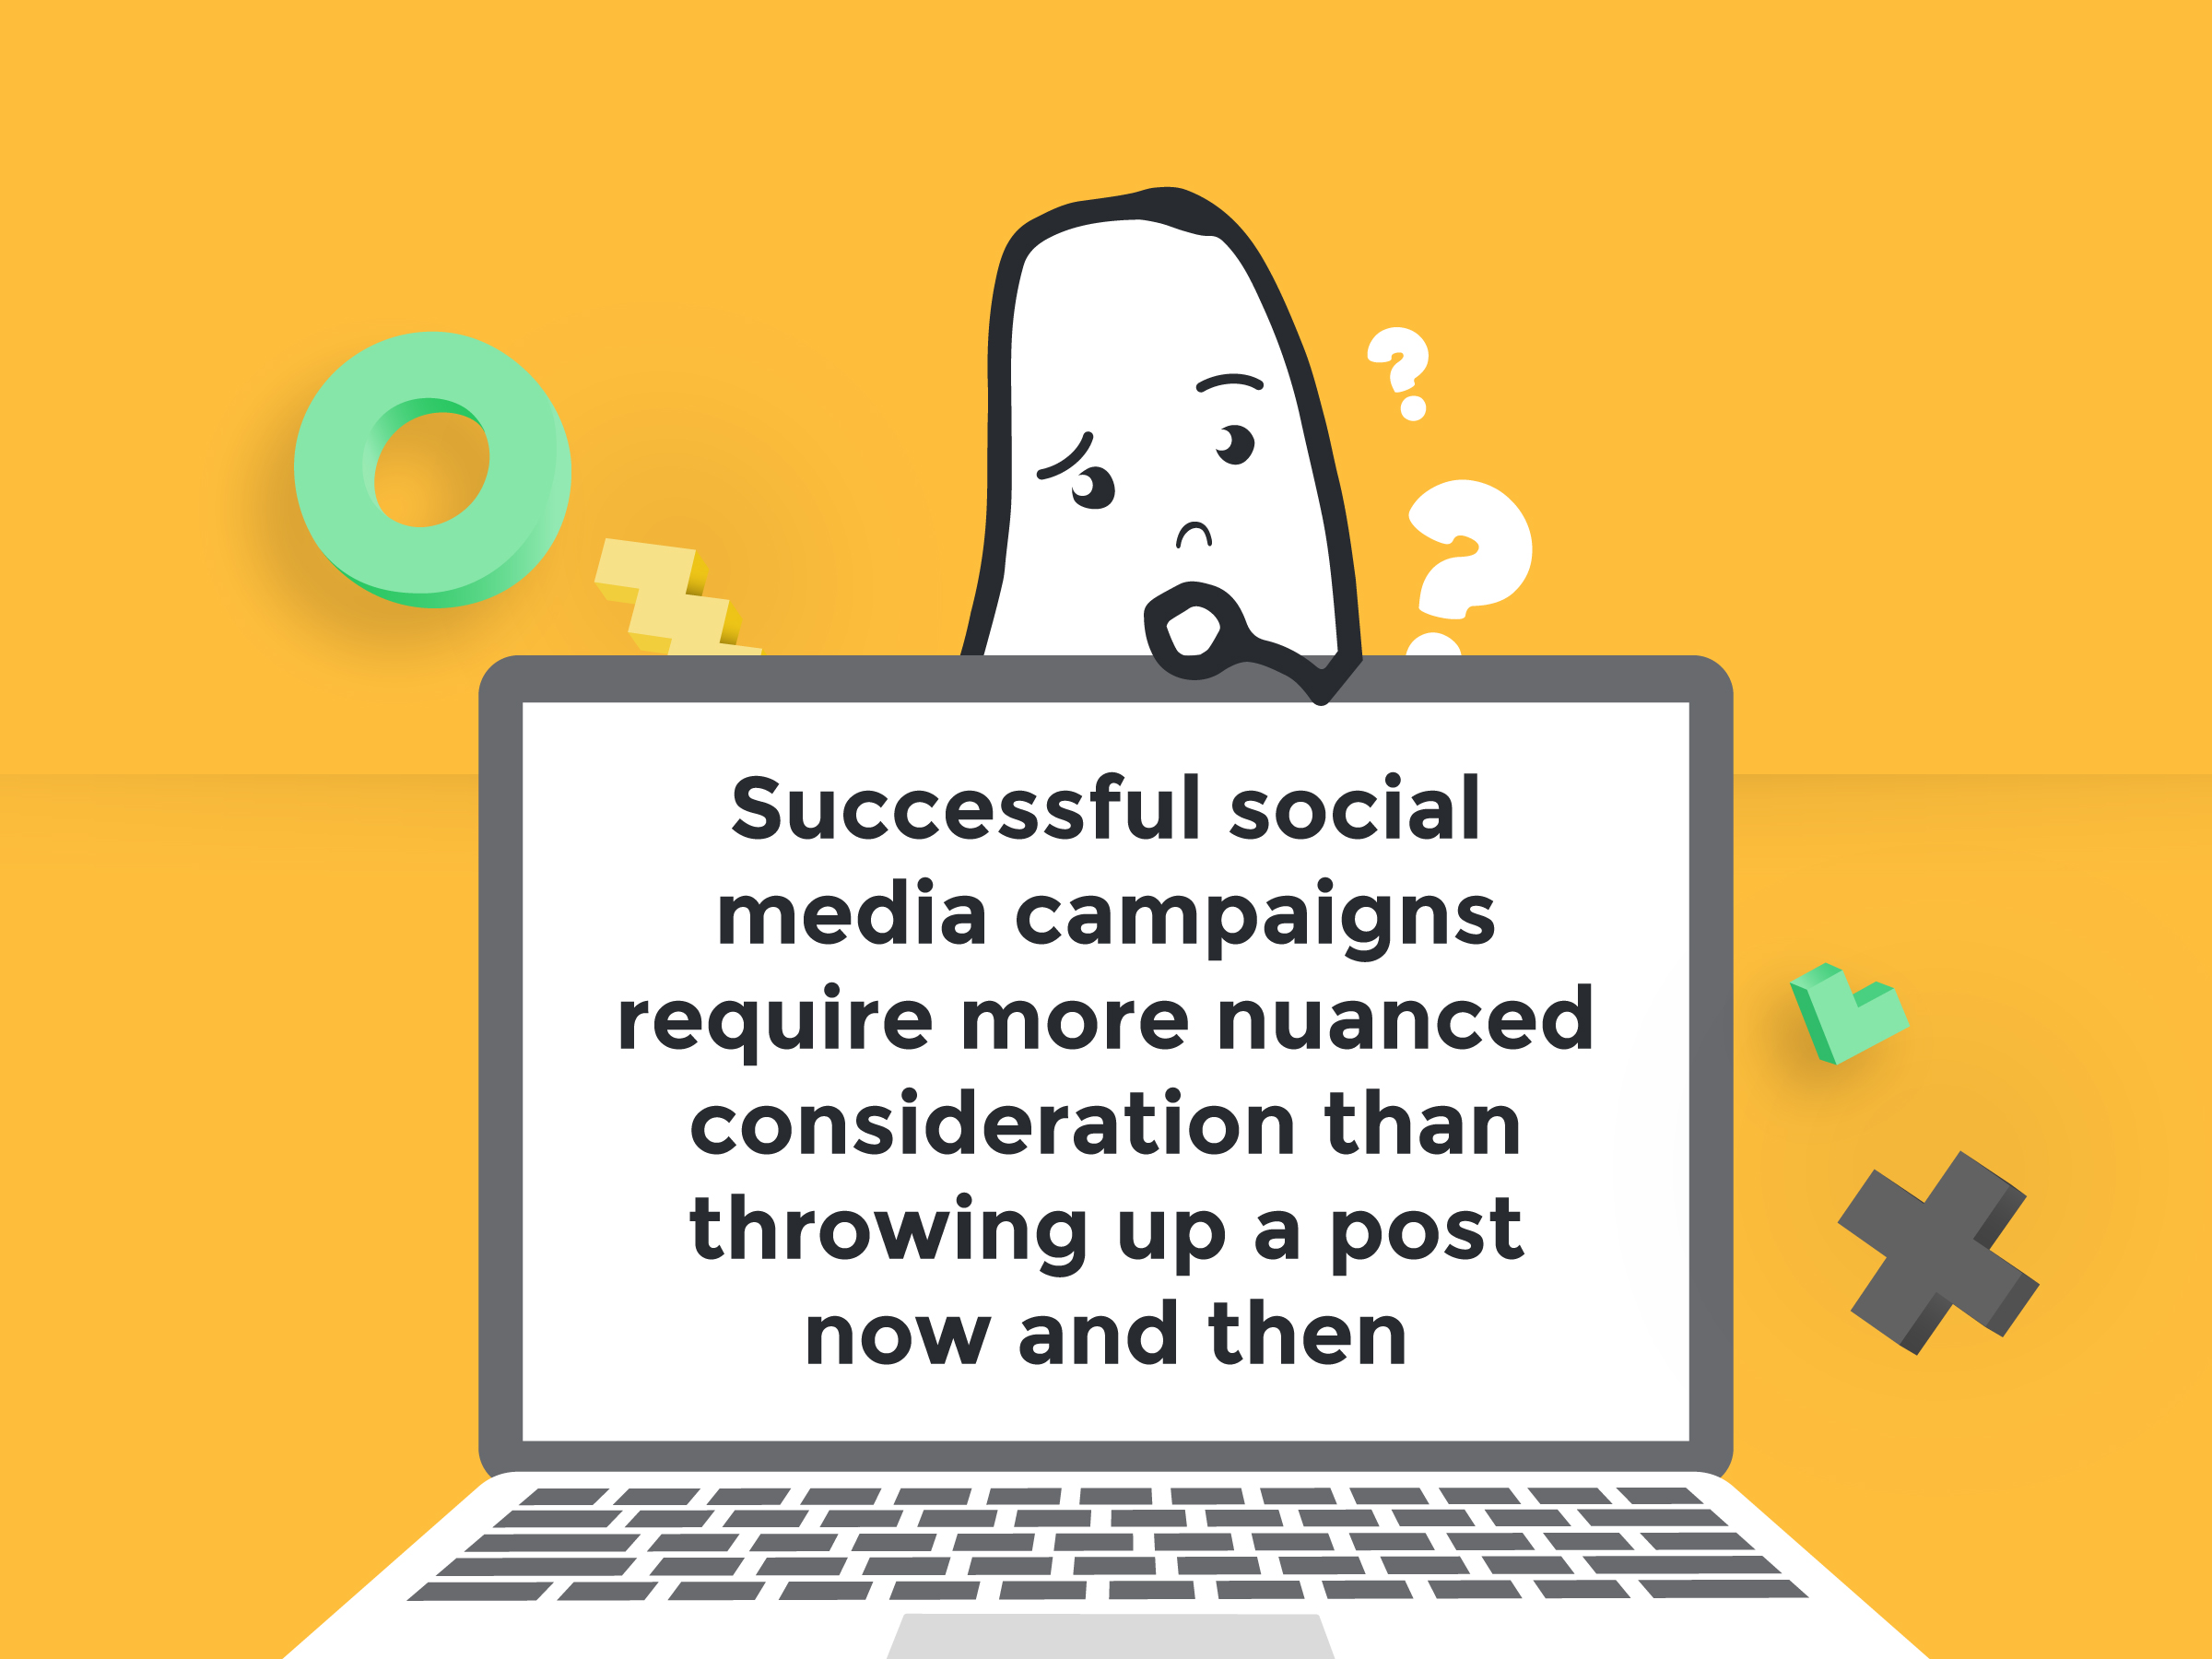 Successful social media campaigns require more nuanced consideration than throwing up a post now and then.